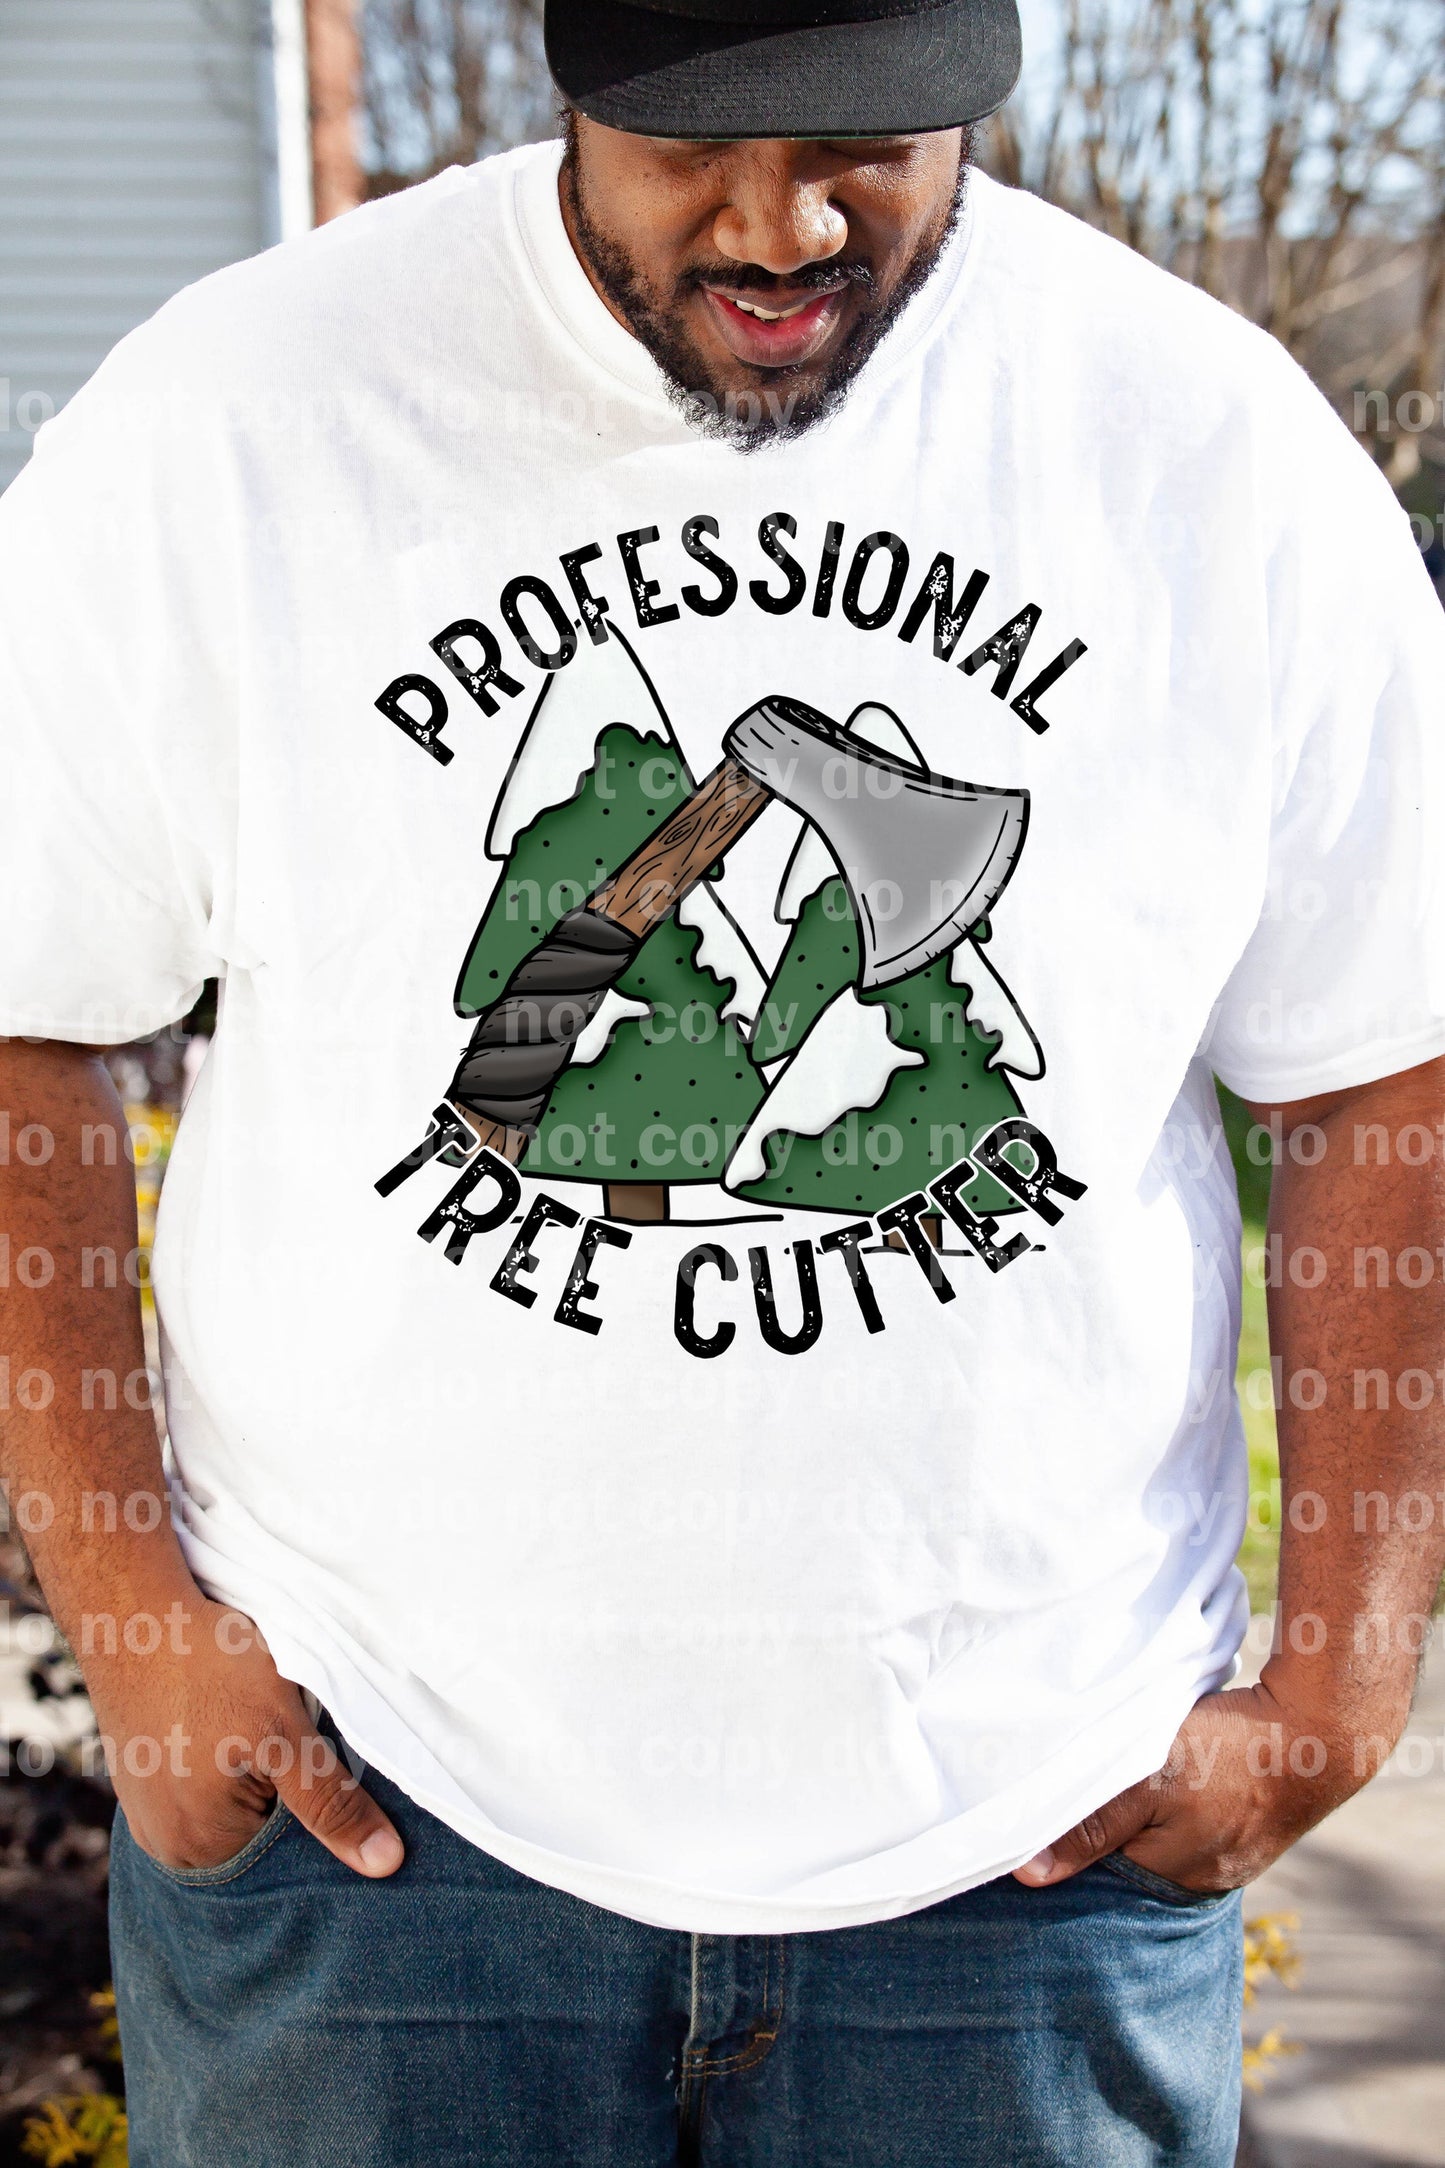 Professional Tree Cutter with Pocket Option Dream Print or Sublimation Print